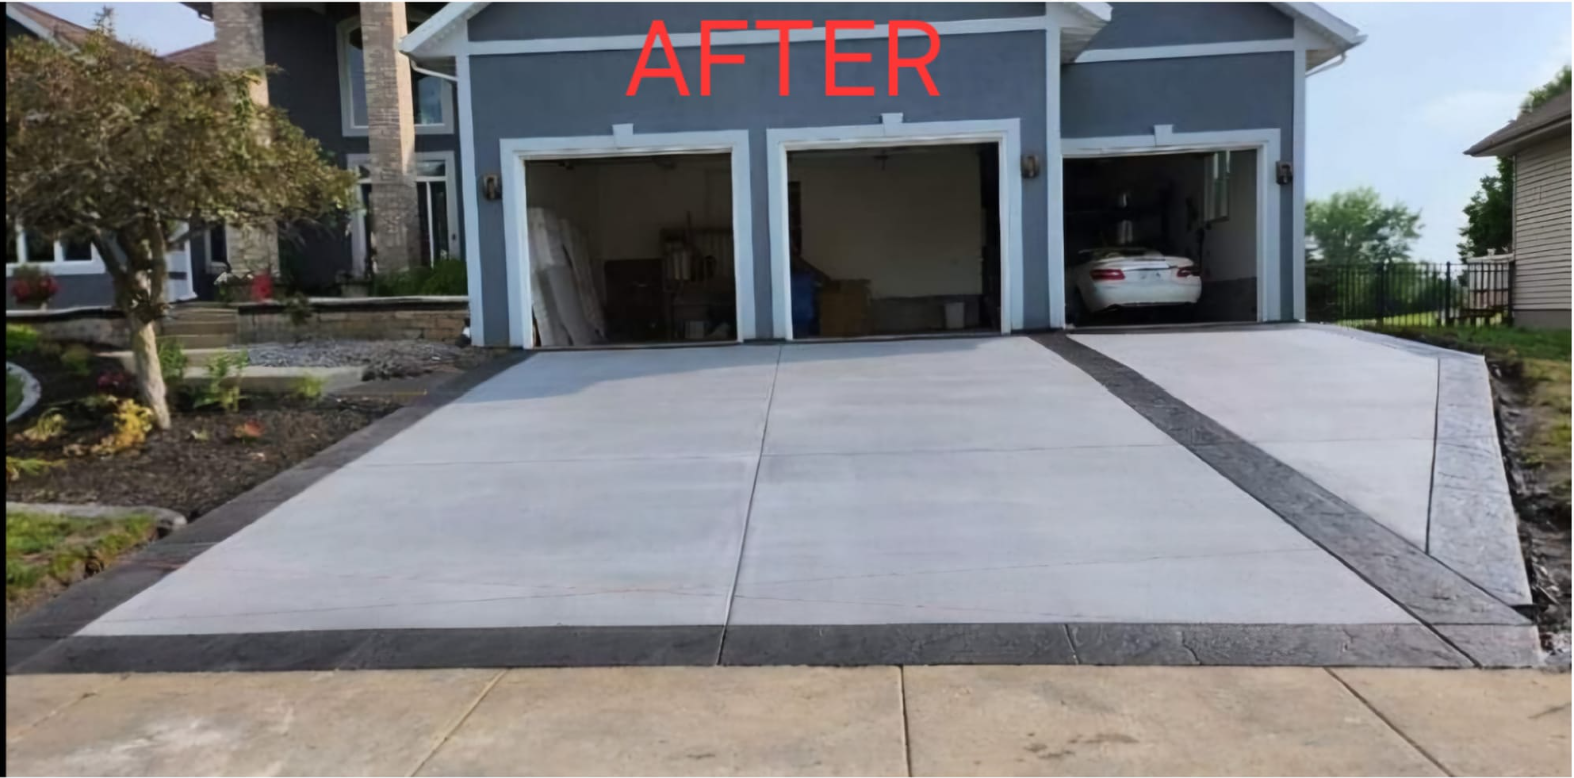 Renovated concrete driveway, fully redone with broom finish